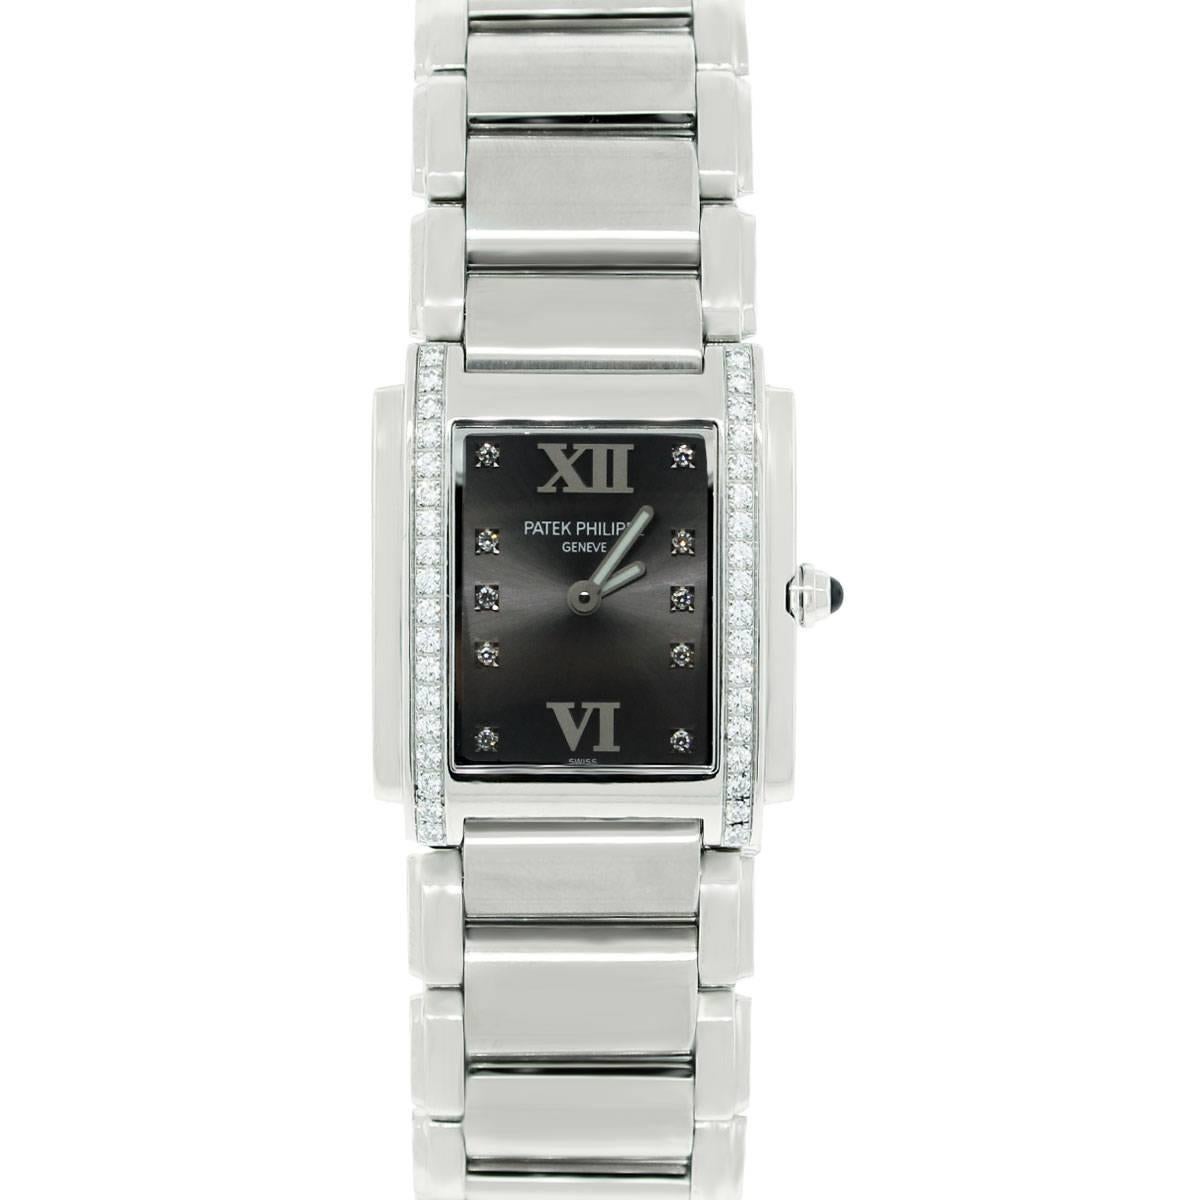 Brand: Patek Philippe
Model: Twenty 4 4910/10A-010
Style: Dress
Material : Stainless Steel
Dial: Gray dial, diamond hour markers and gold Roman numerals at 12 and 6 o'clock; with silver luminescent hands
Bezel: Smooth, Fixed Stainless Steel